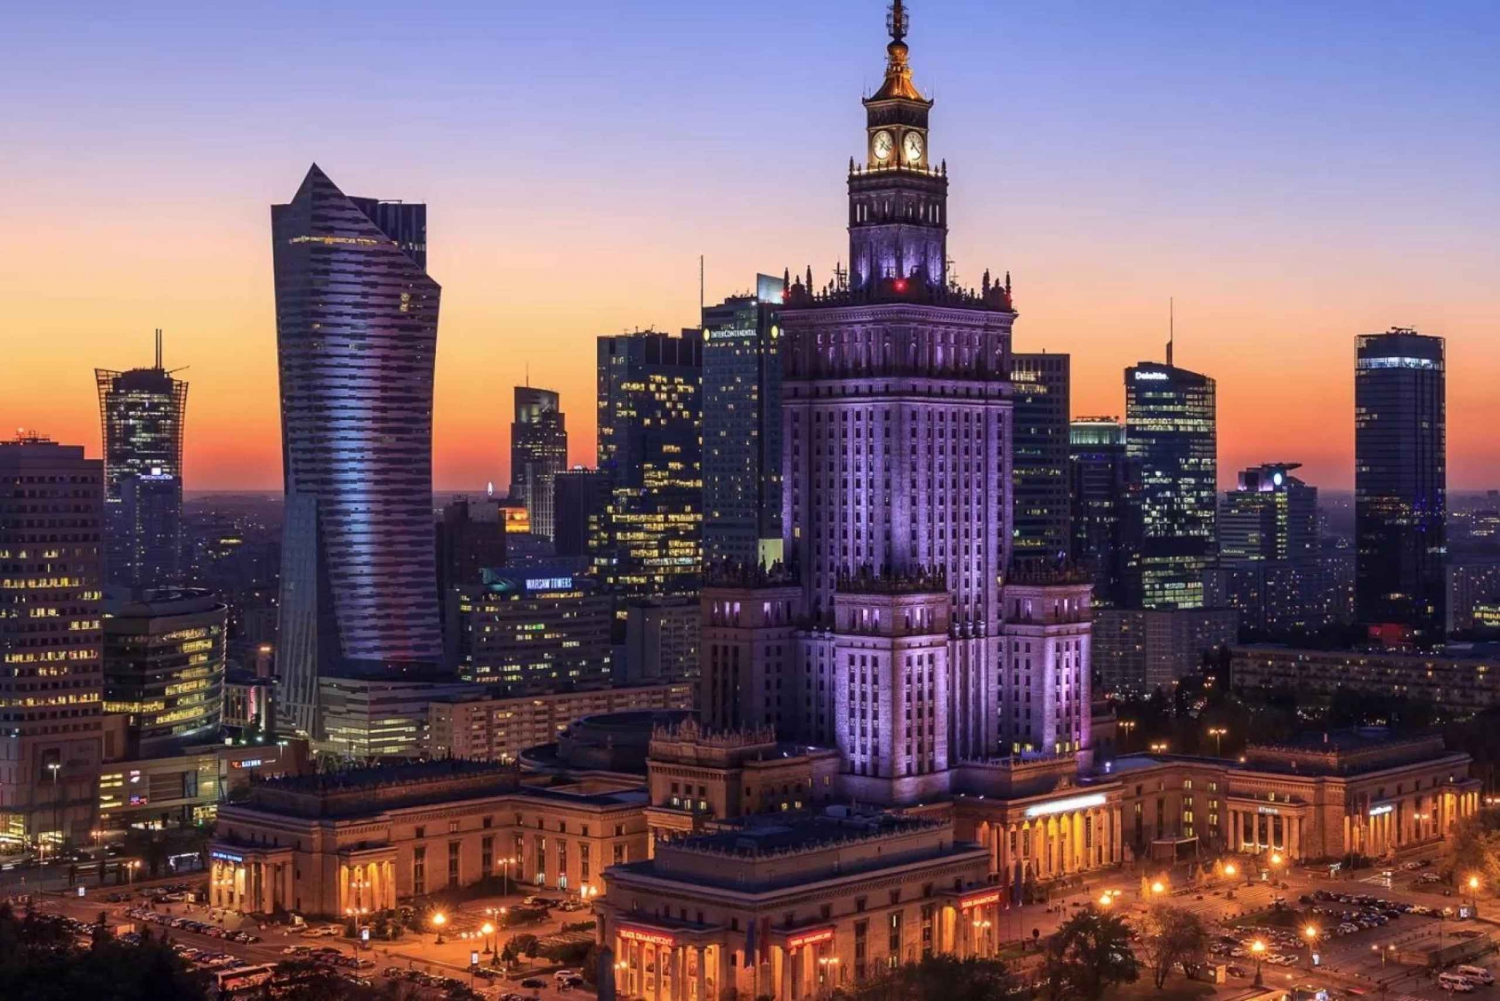 Warsaw: Palace of Culture and Science & Wilanow Palace